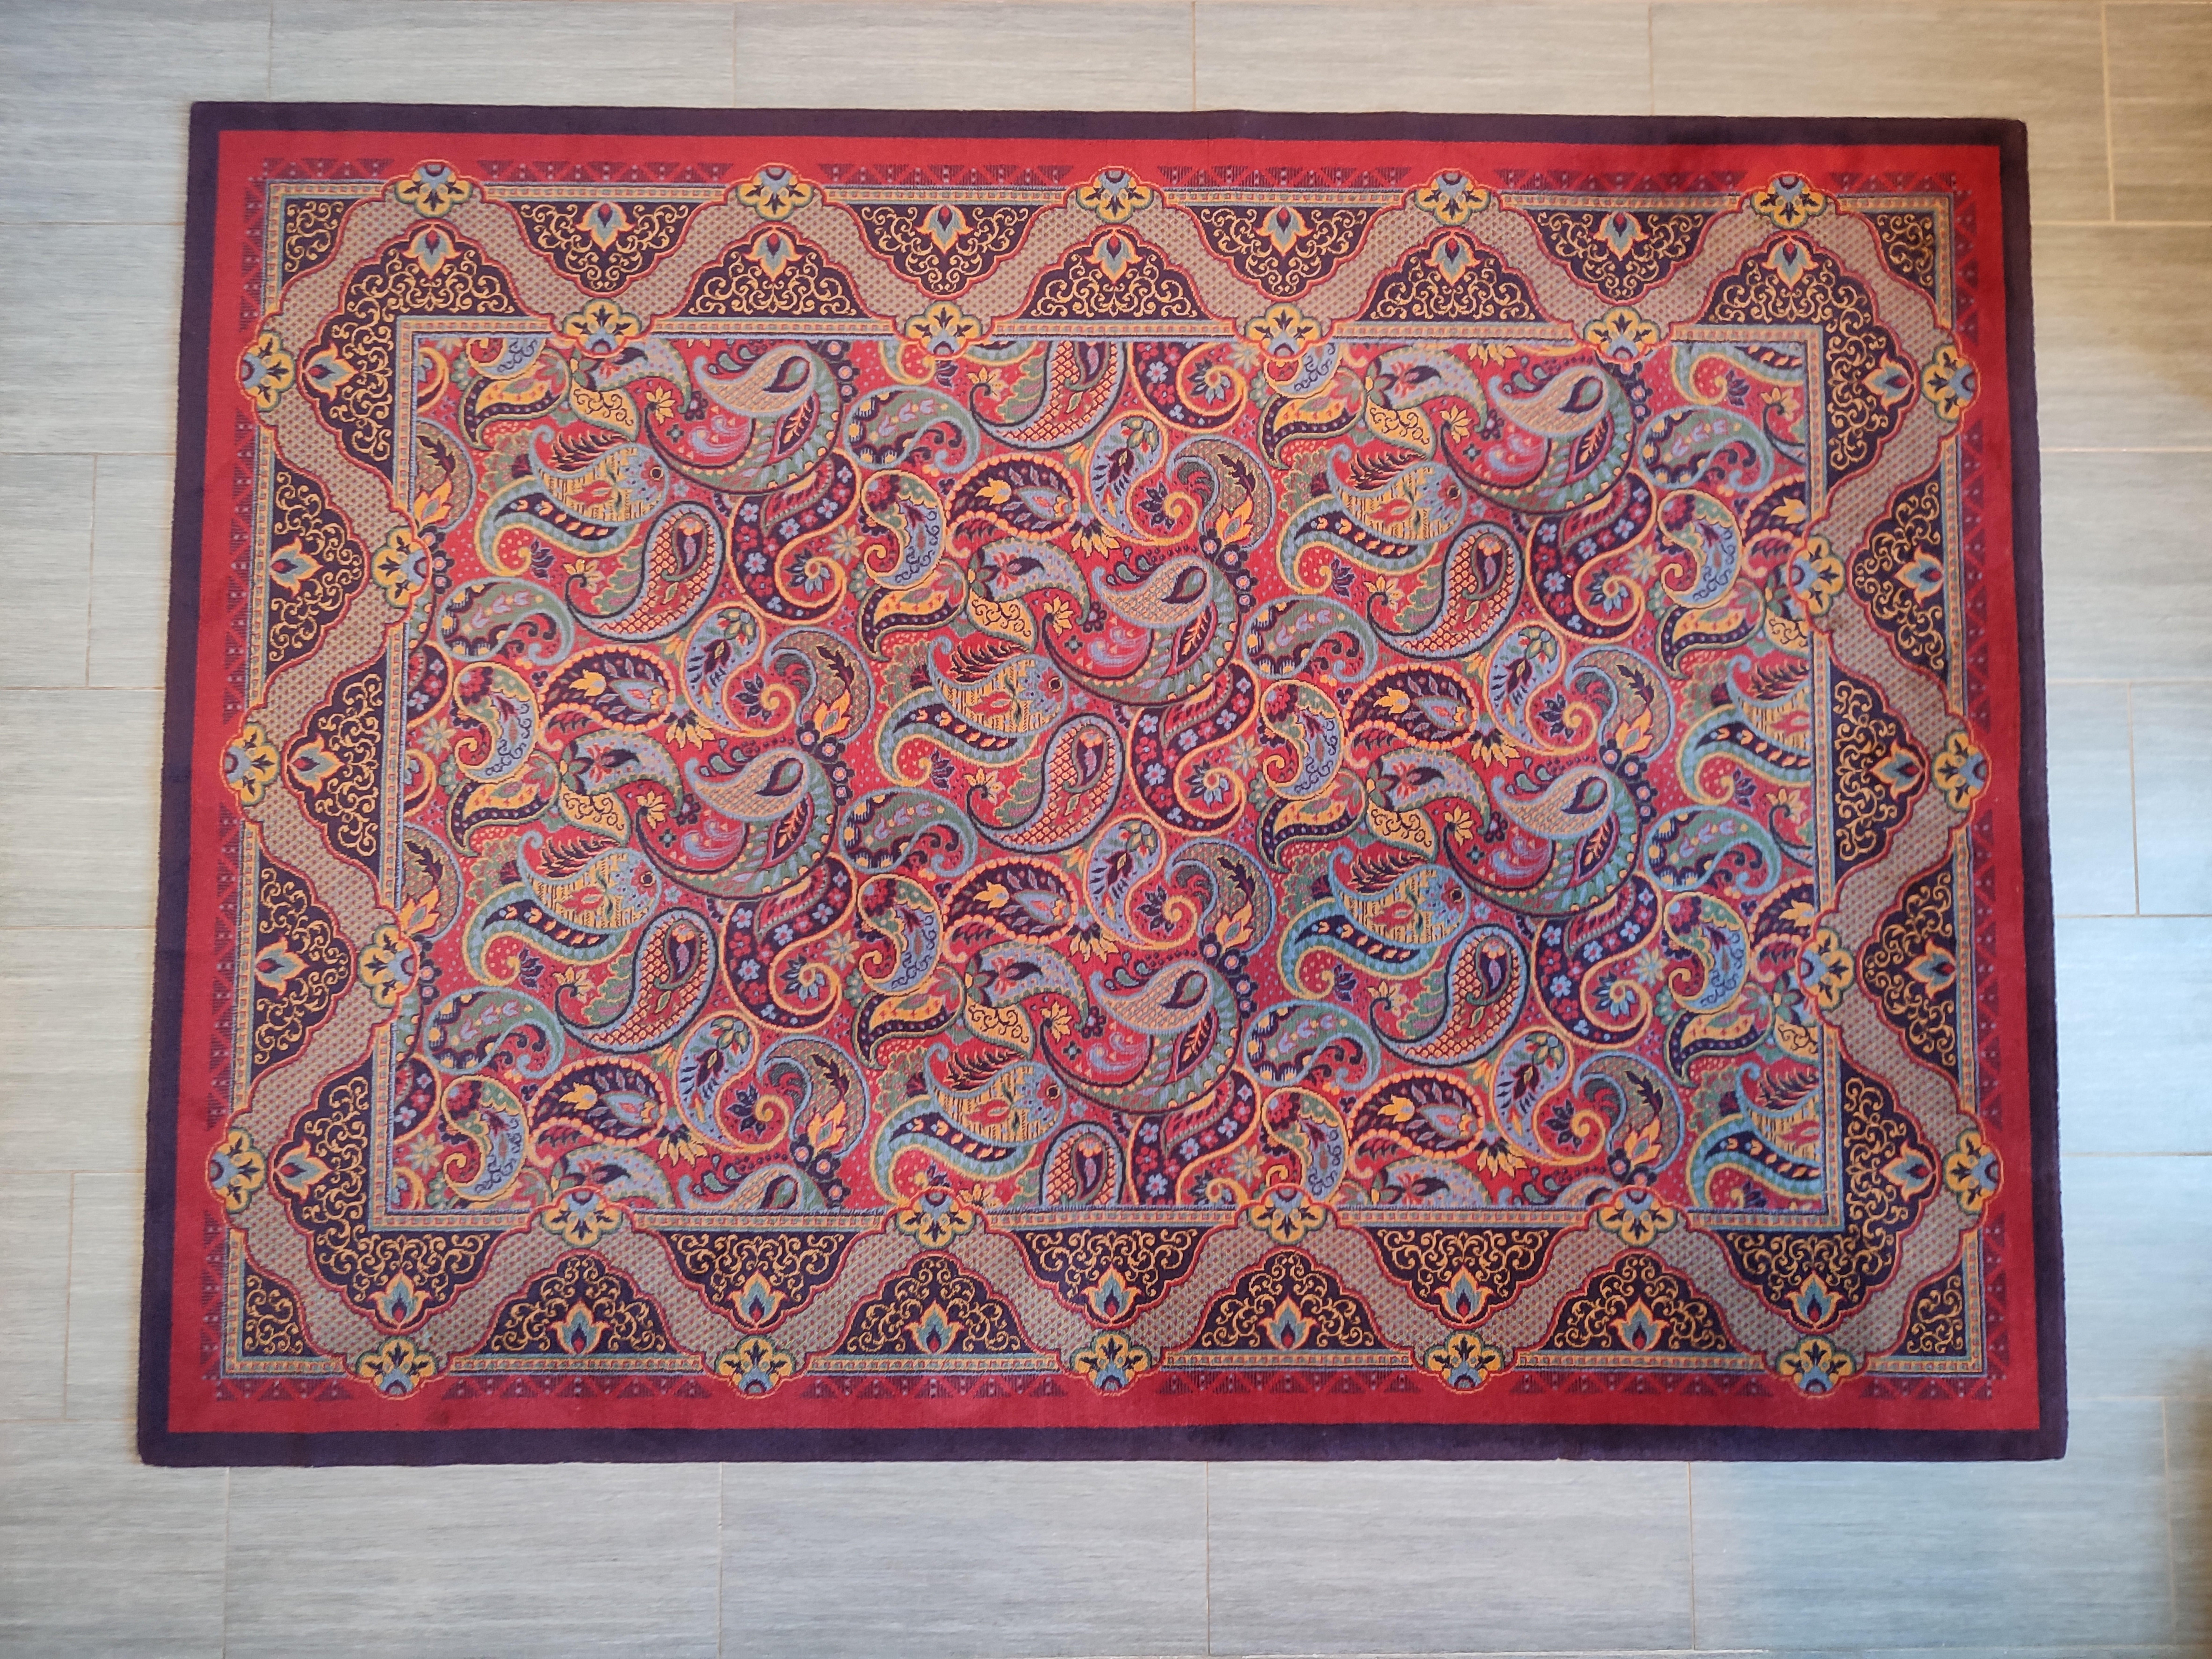 1970s Belgian Pure Wool Carpet – Louis de Poortere

In the Middle Ages, Flemish textile products were appreciated throughout Europe for their beauty and quality. Since 1859, the De Poortere Brothers family company had been producers and traders of